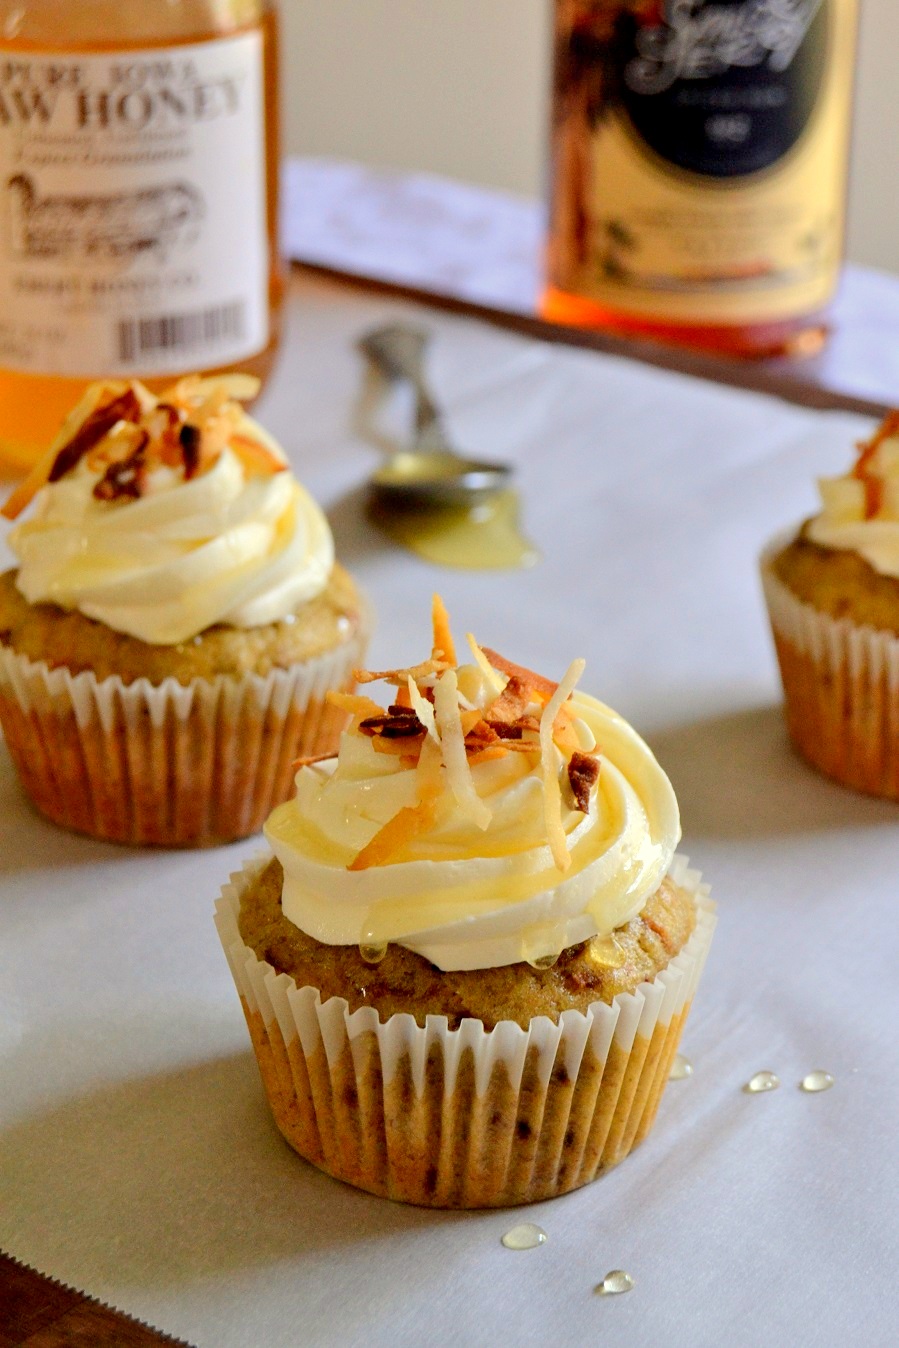 Toasted Coconut Banana Cupcakes with Rum Spiked Honey Swirl Frosting